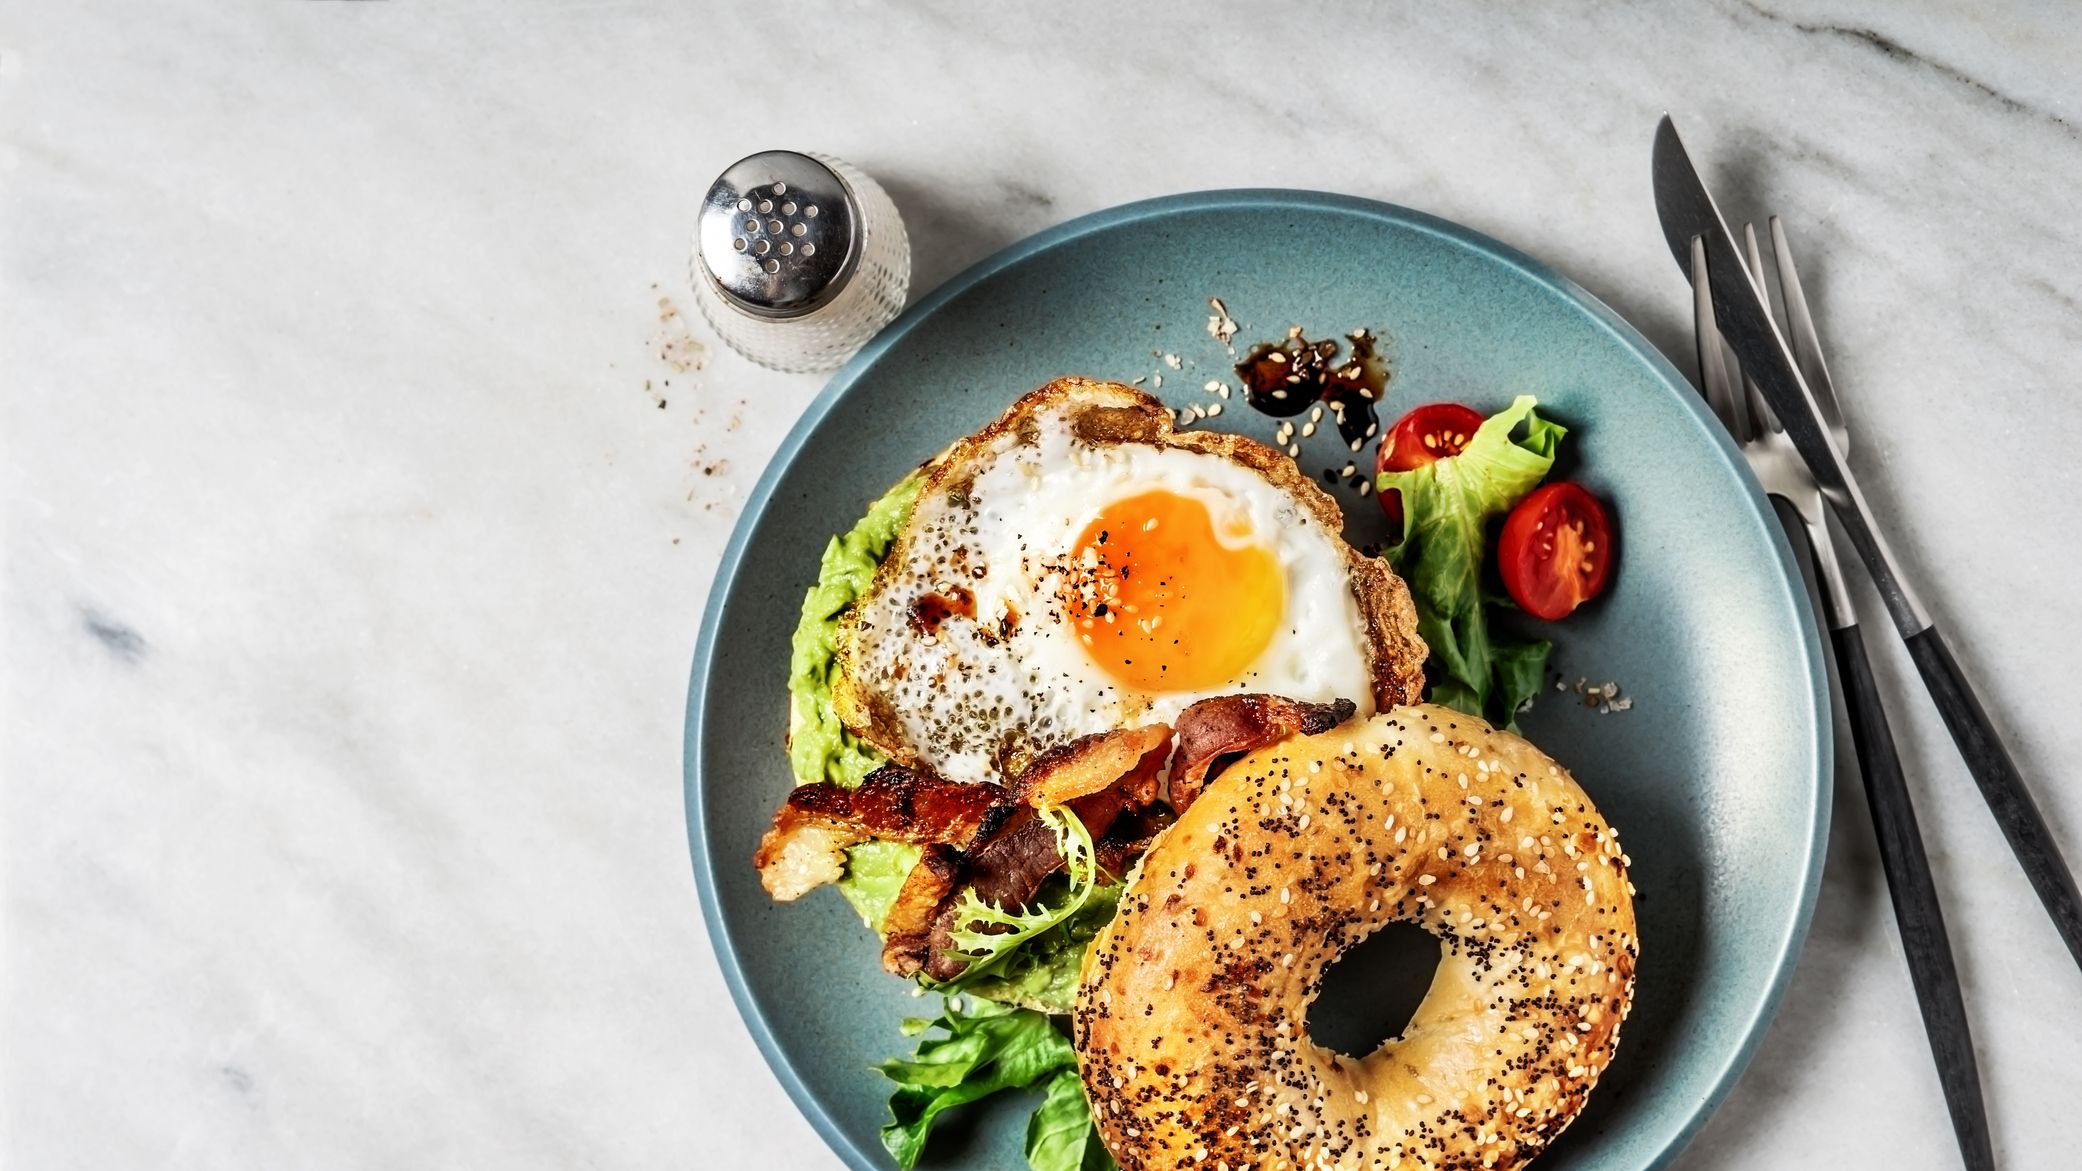 https://hips.hearstapps.com/hmg-prod/images/bagel-sandwich-with-avocado-fried-egg-and-side-royalty-free-image-1584725317.jpg?crop=1xw:0.81315xh;center,top